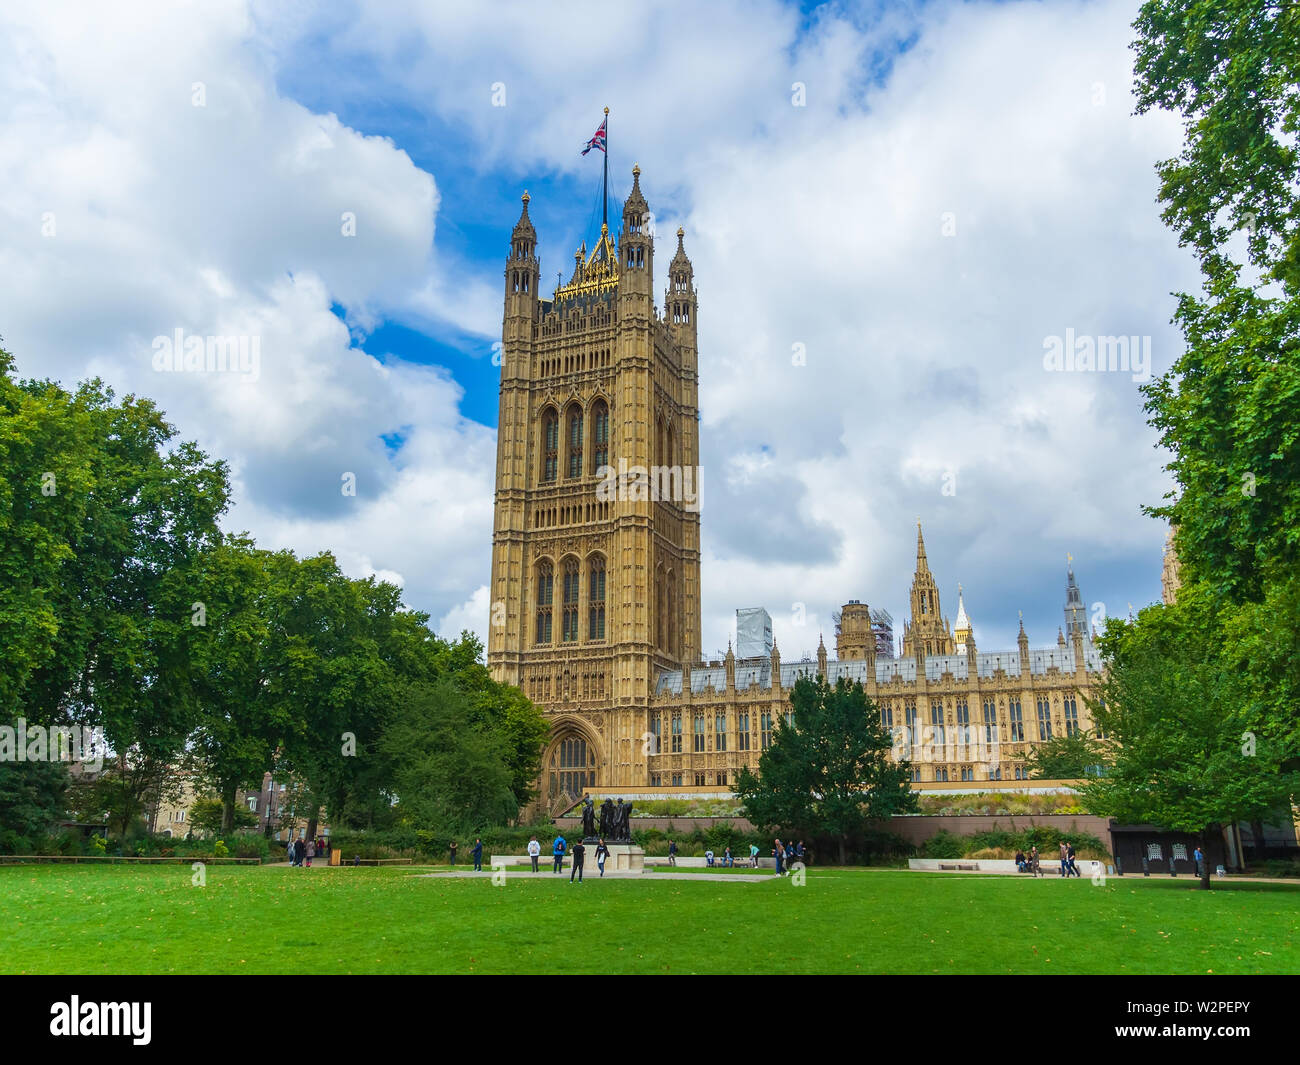 Palace of Westminster (Houses of Parliament) with Victoria Tower viewed from Victoria tower gardens, London, England, UK. Stock Photo